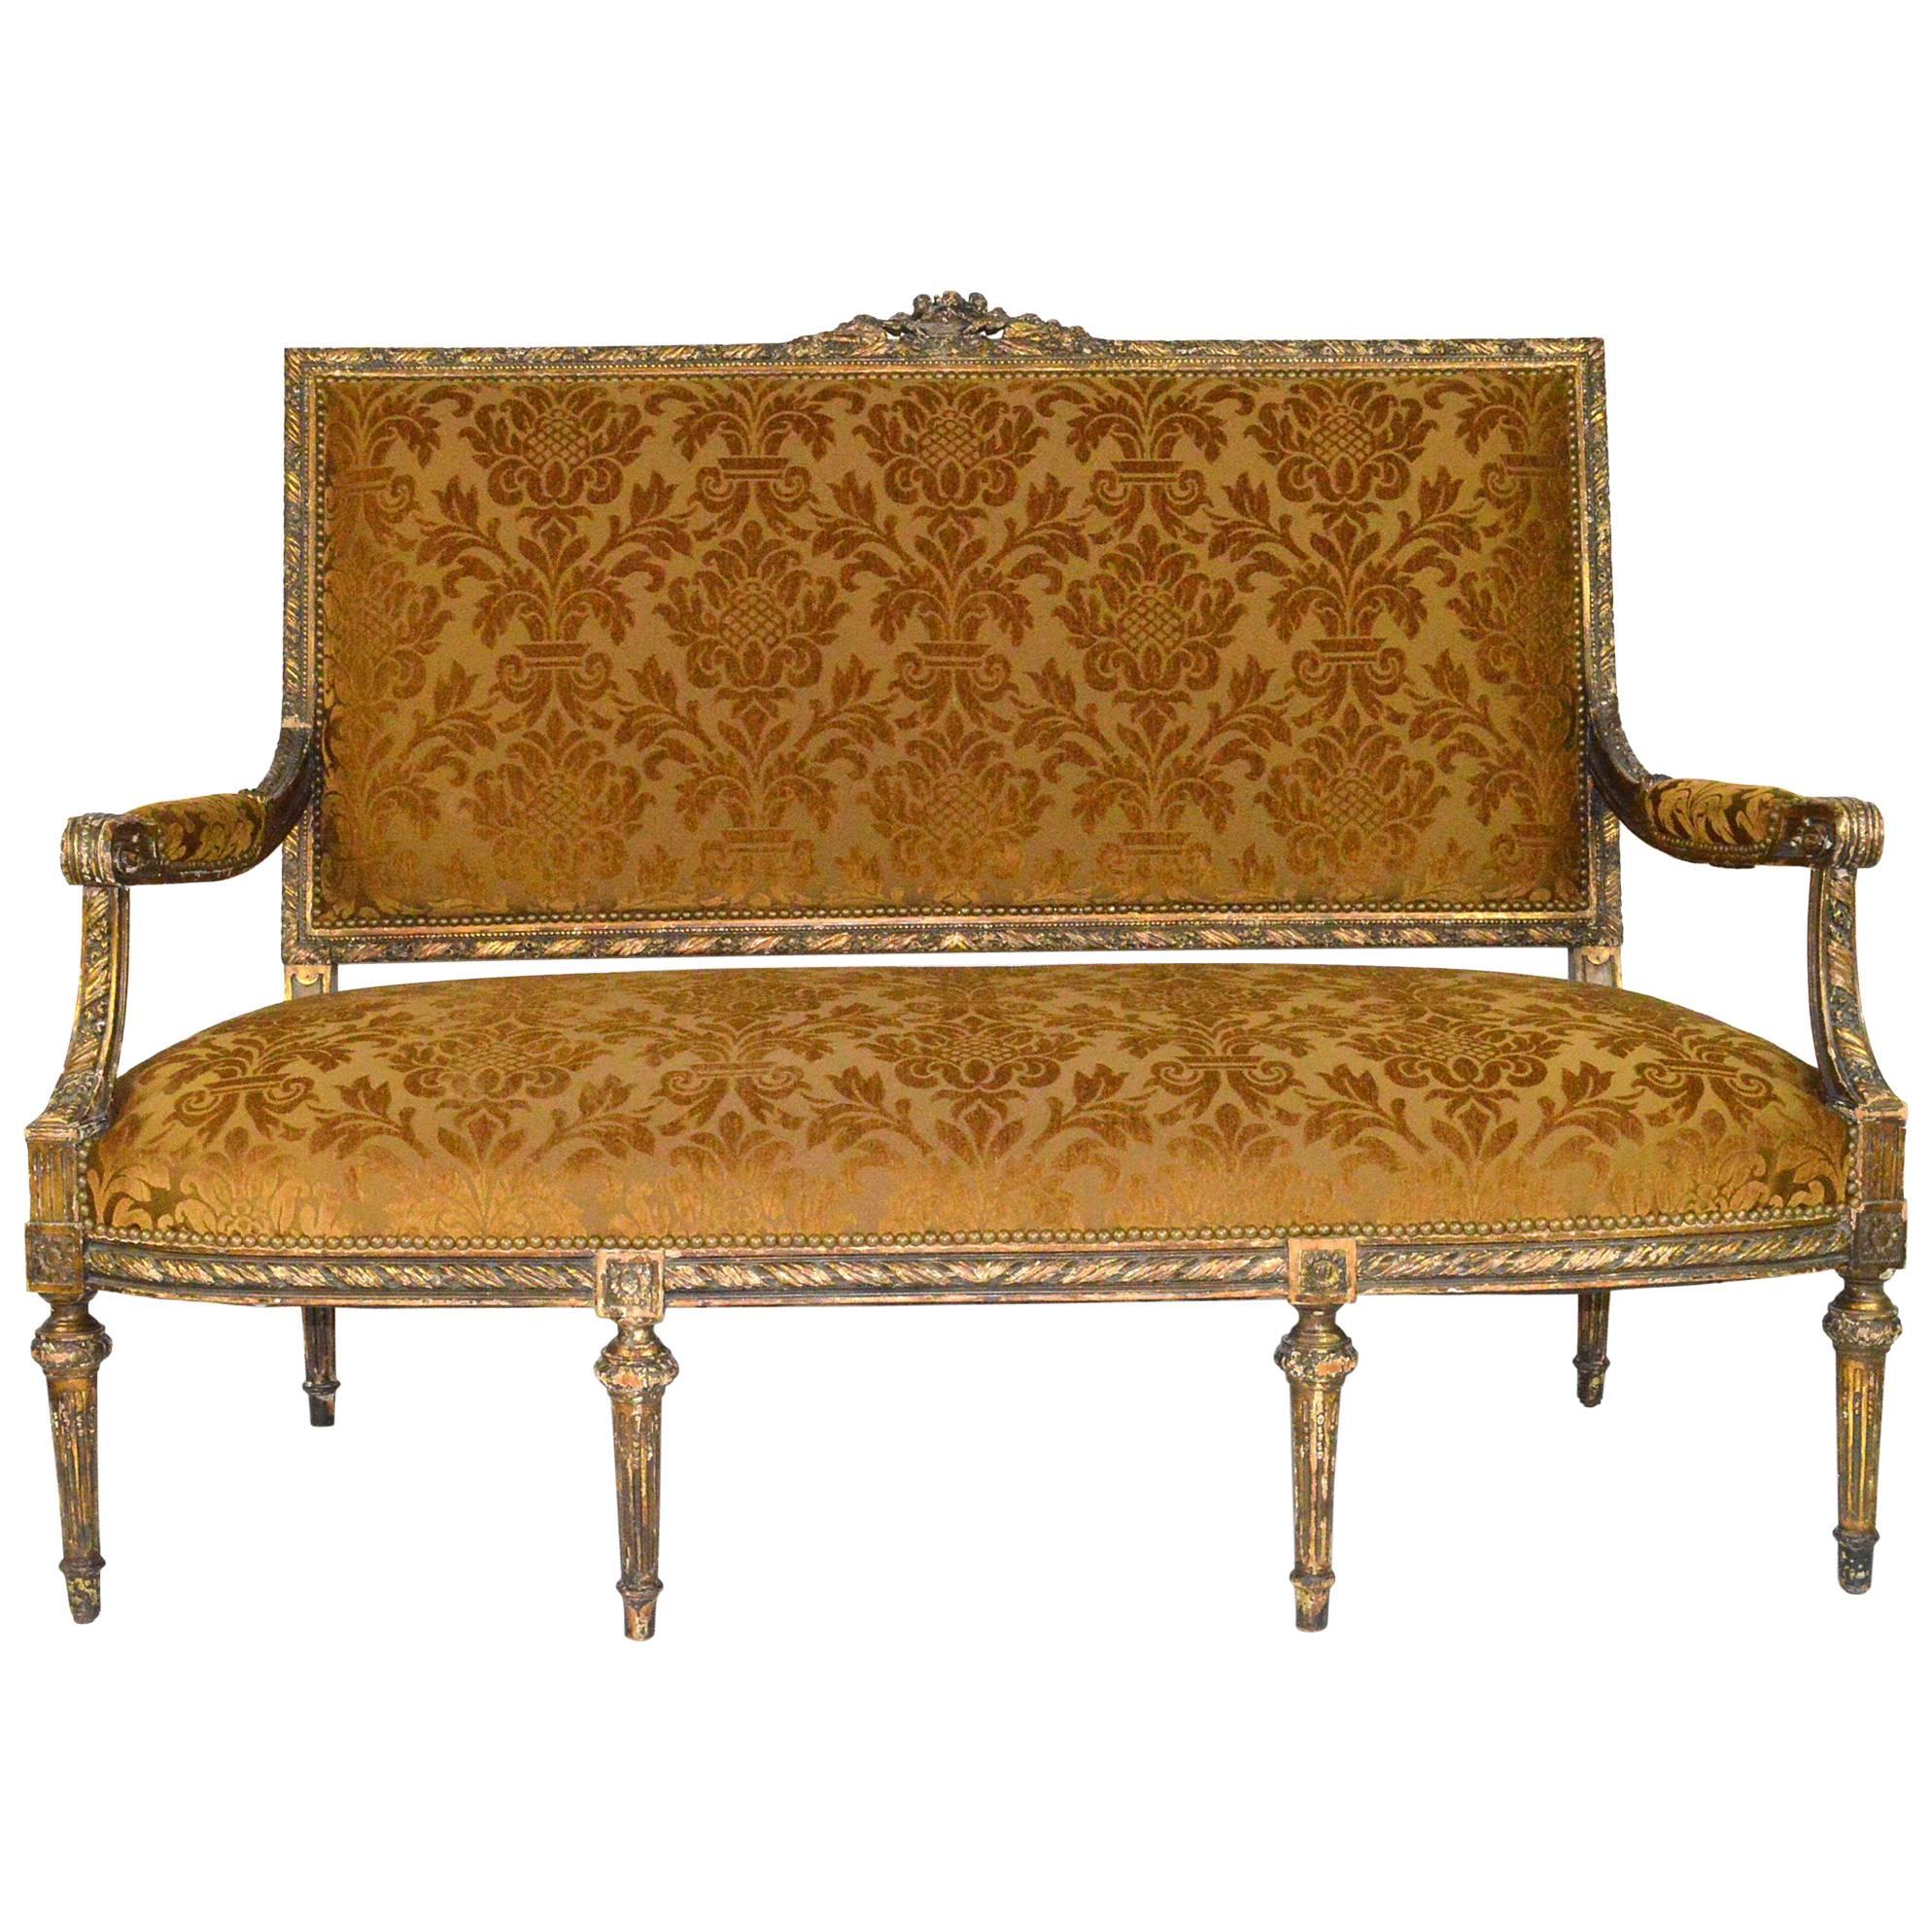 19th Century French Louis XVI Style Carved Painted Gilt Settee For Sale